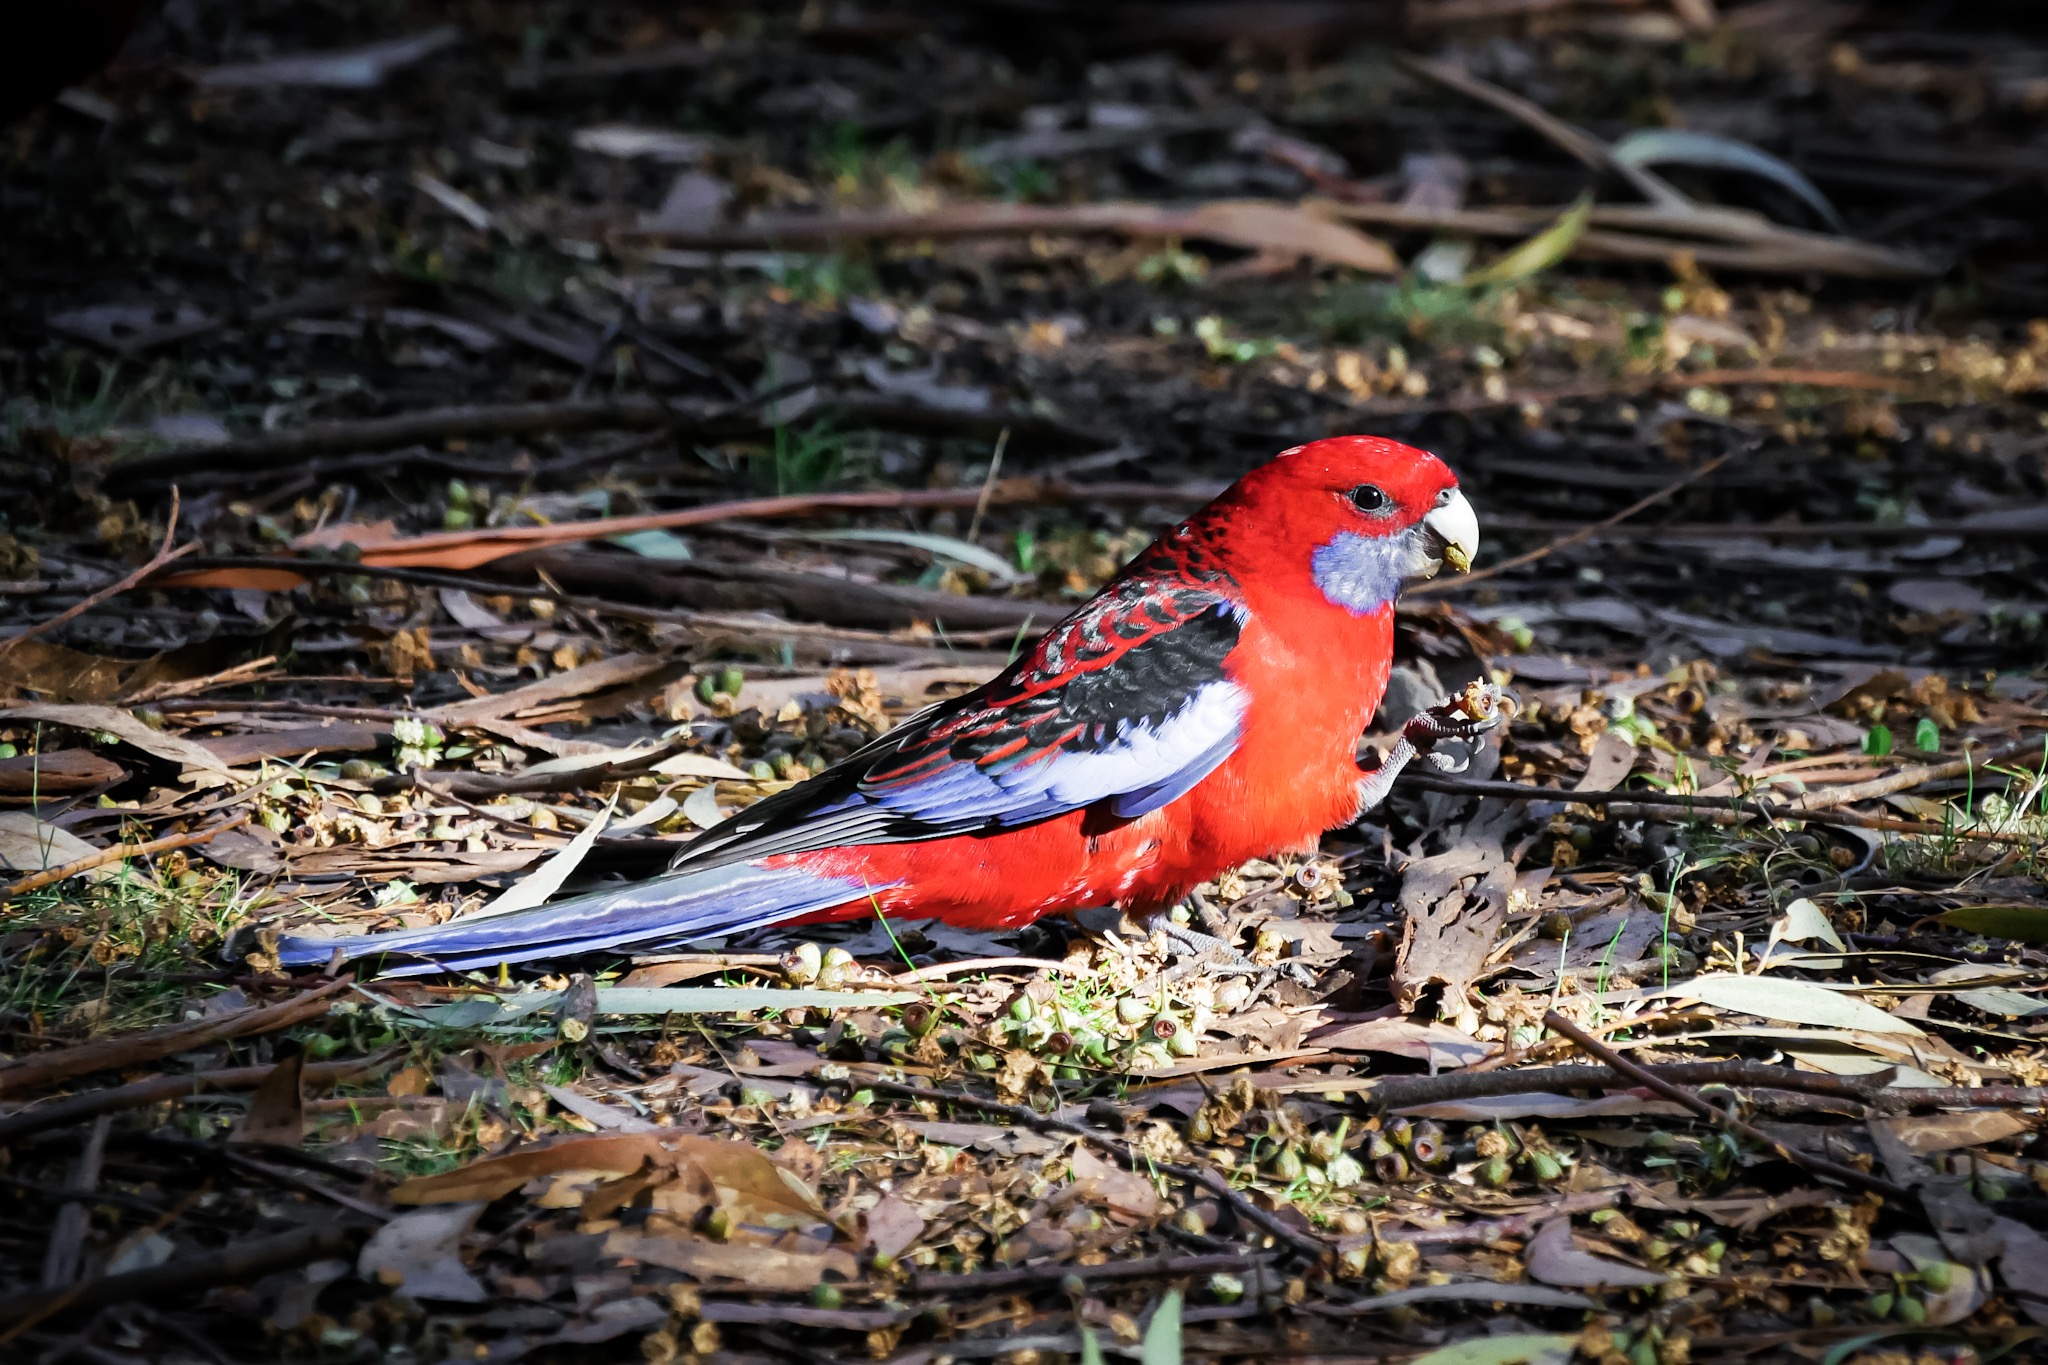 A Crimson rosella collecting seeds in the Australian countryside © Claire Blumenfeld